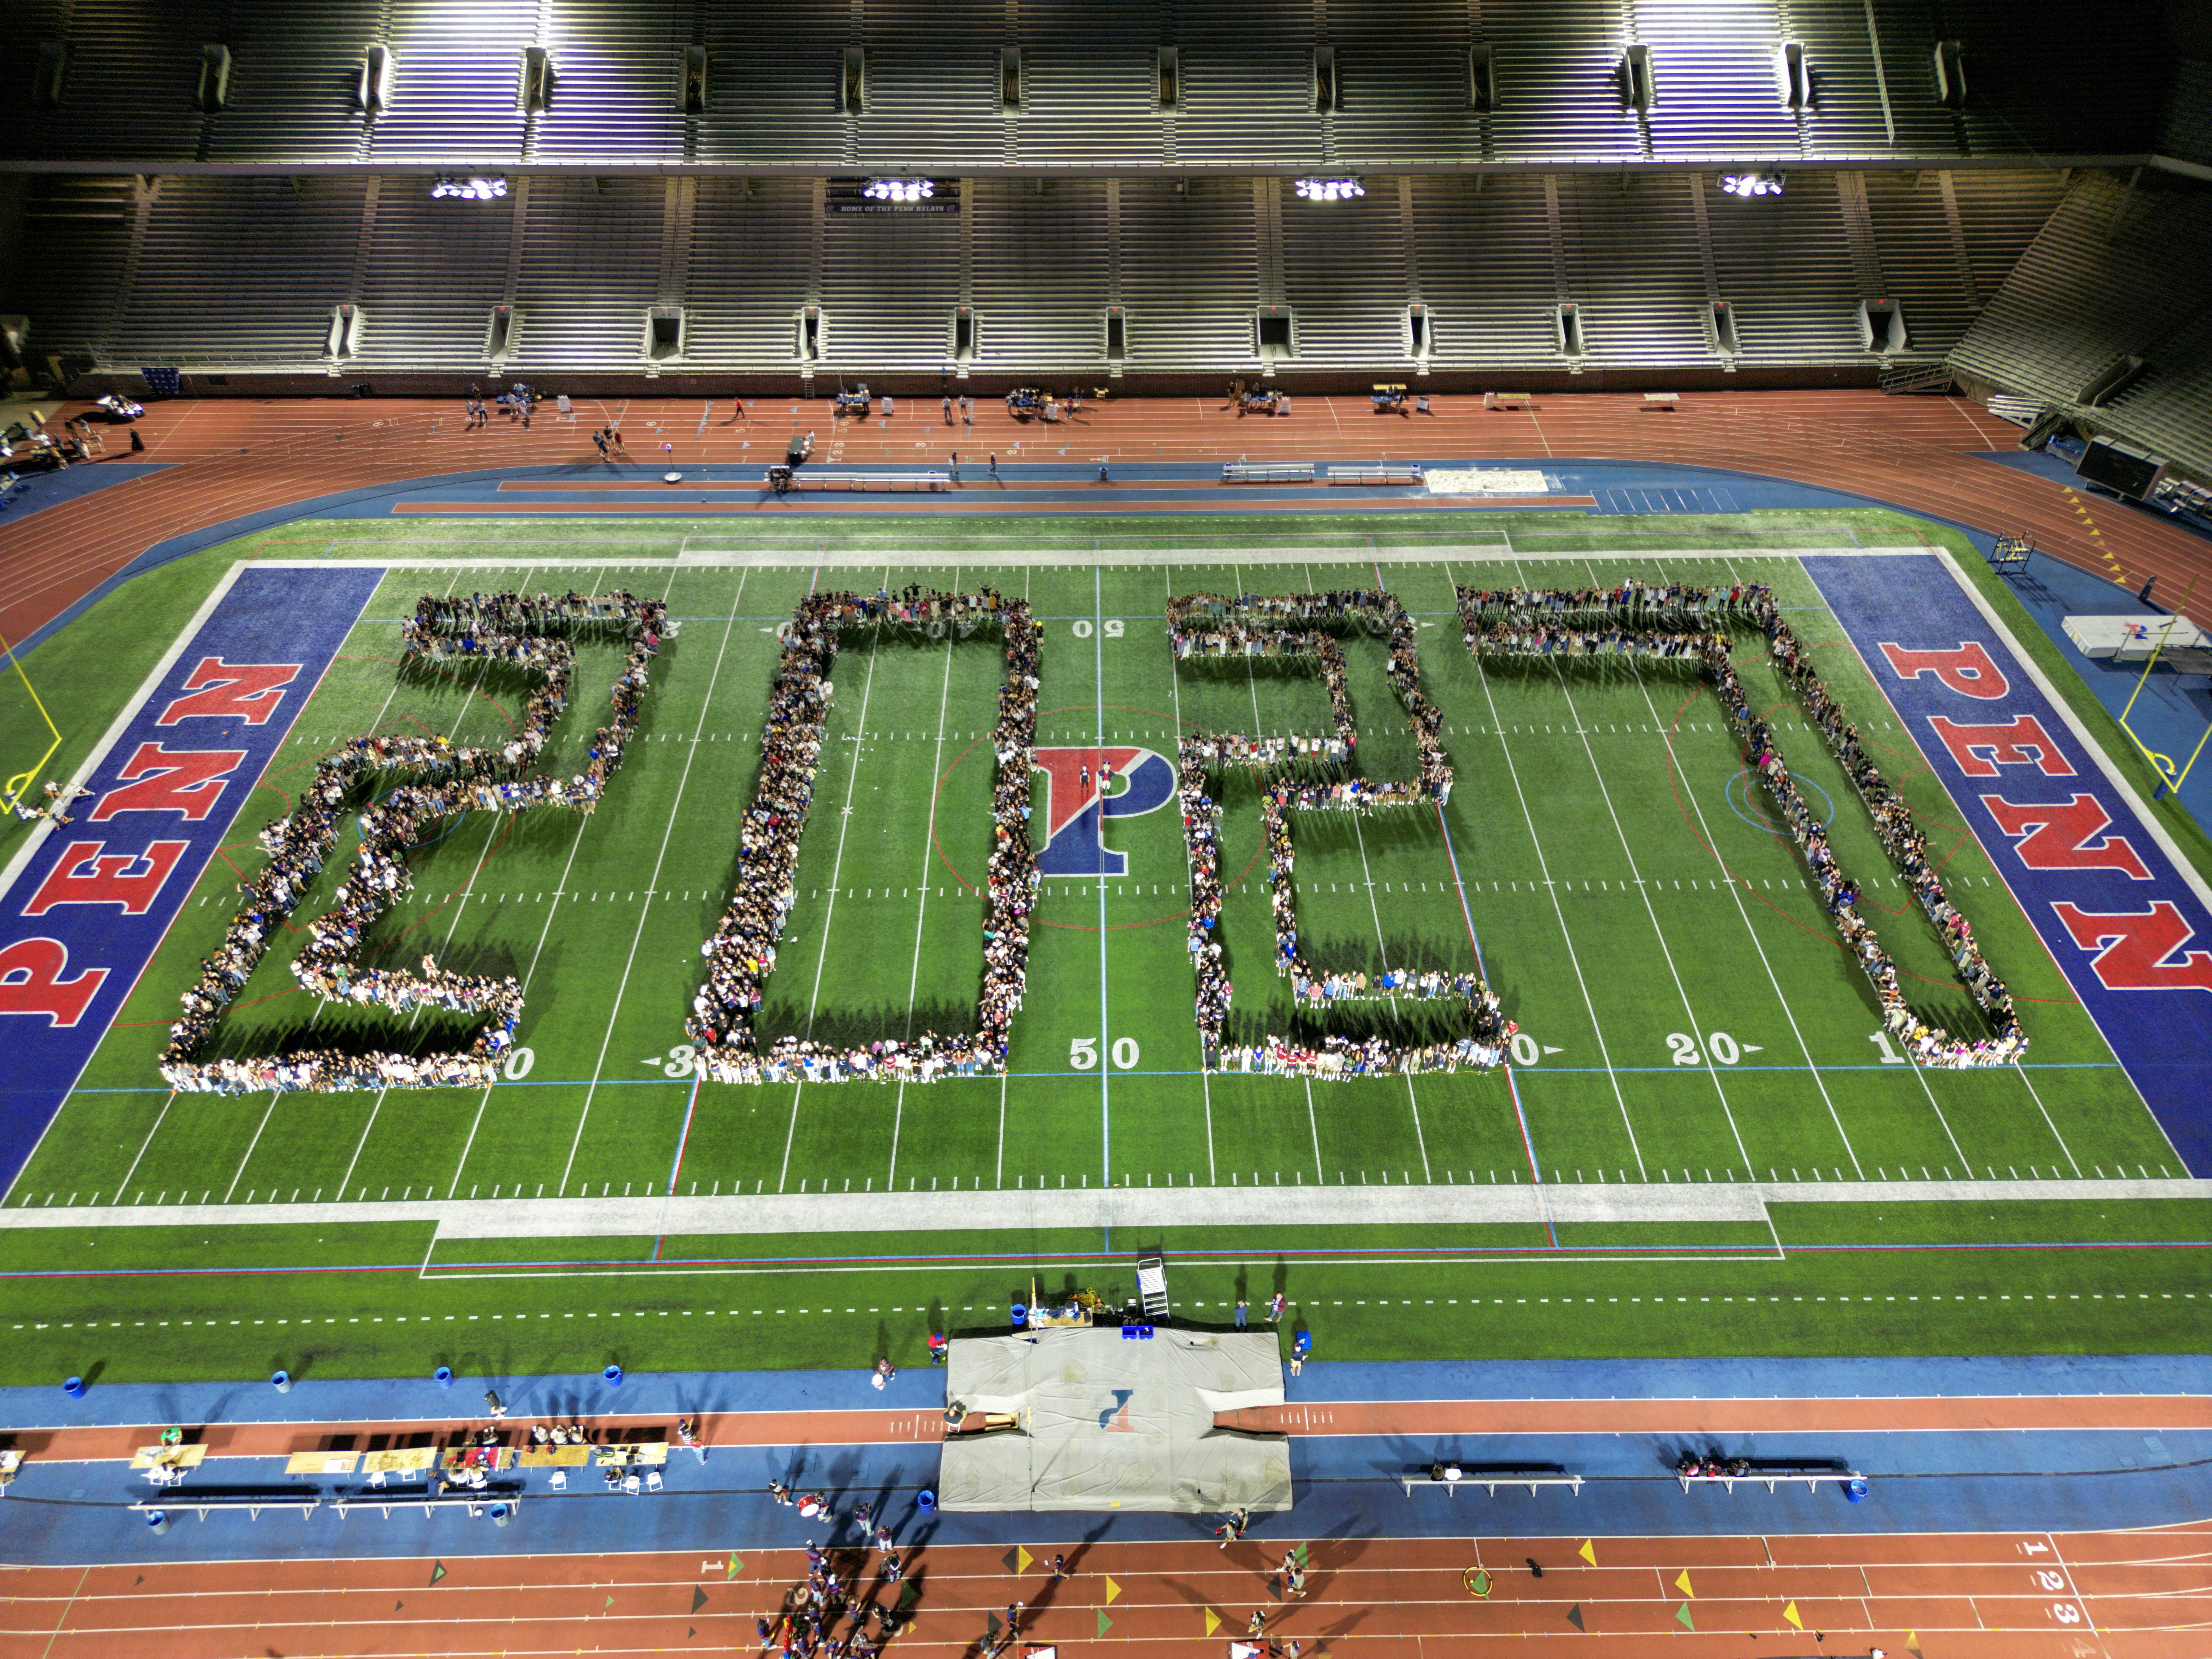 Class of 2027 spelled out in students on Franklin Field